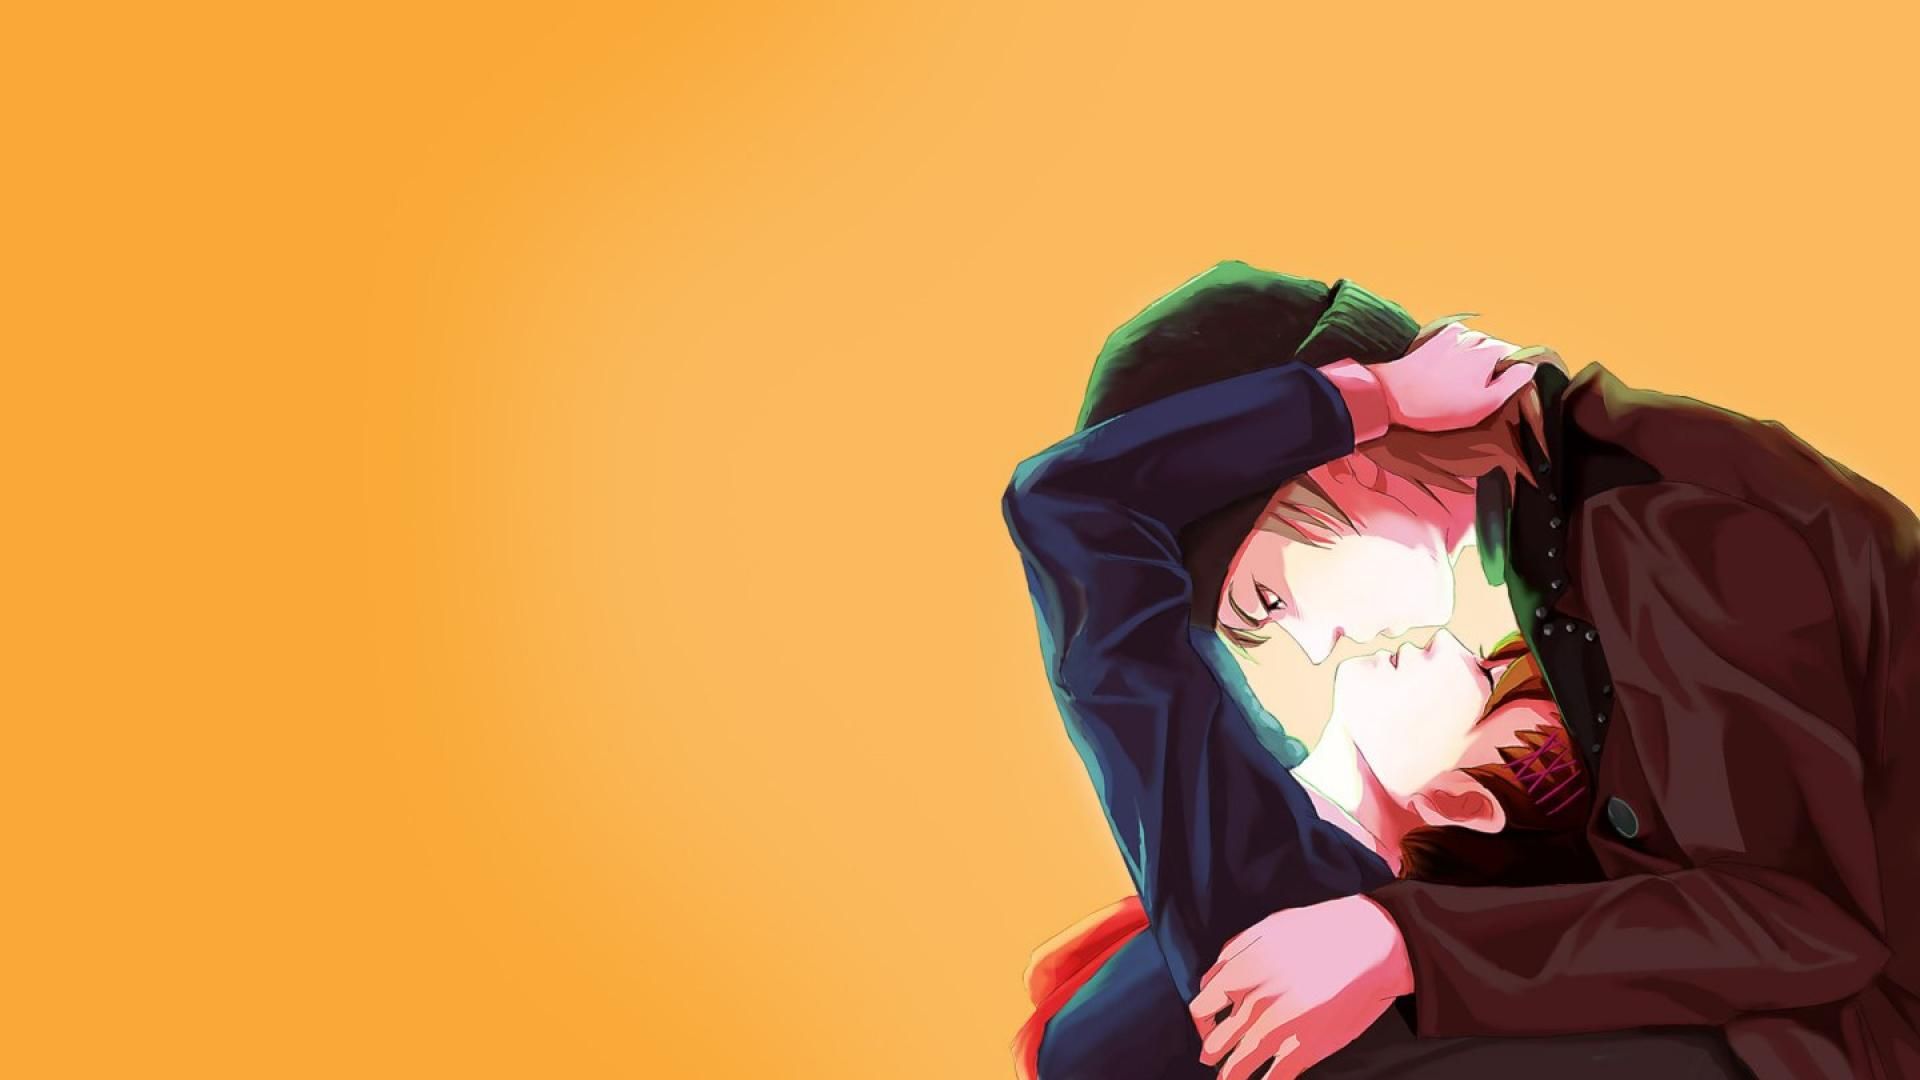 Persona 4 wallpaper 1440x900 - (#26970) - High Quality and ...